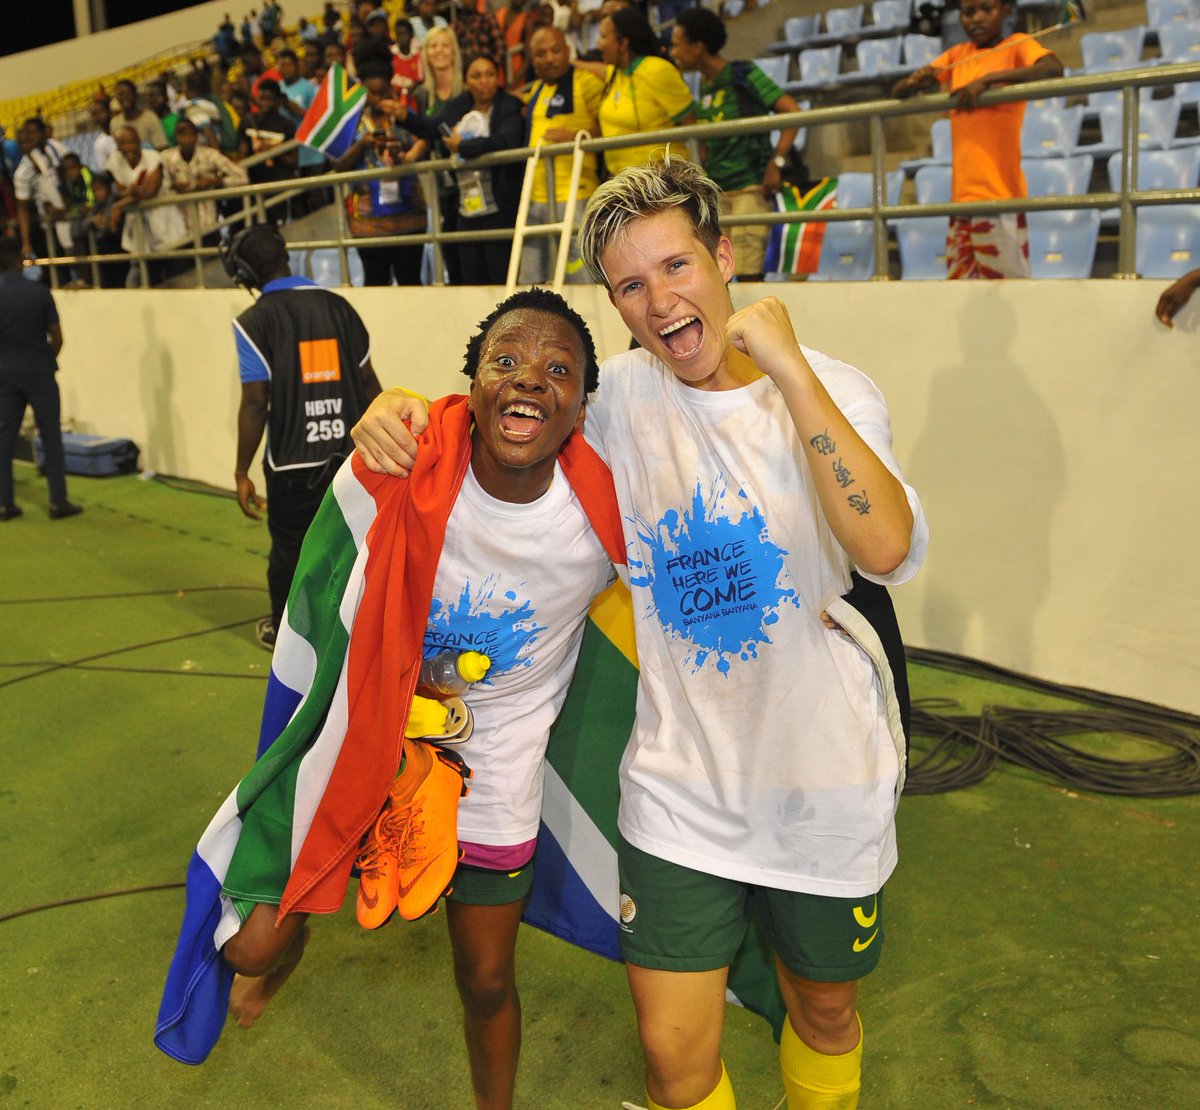 Banyana Banyana striker Thembi Kgatlana and Captain Janine van Wyk celebrate their win against Mali in the AWCON semi-final and qualifying for the FIFA Women’s World Cup in France next year.